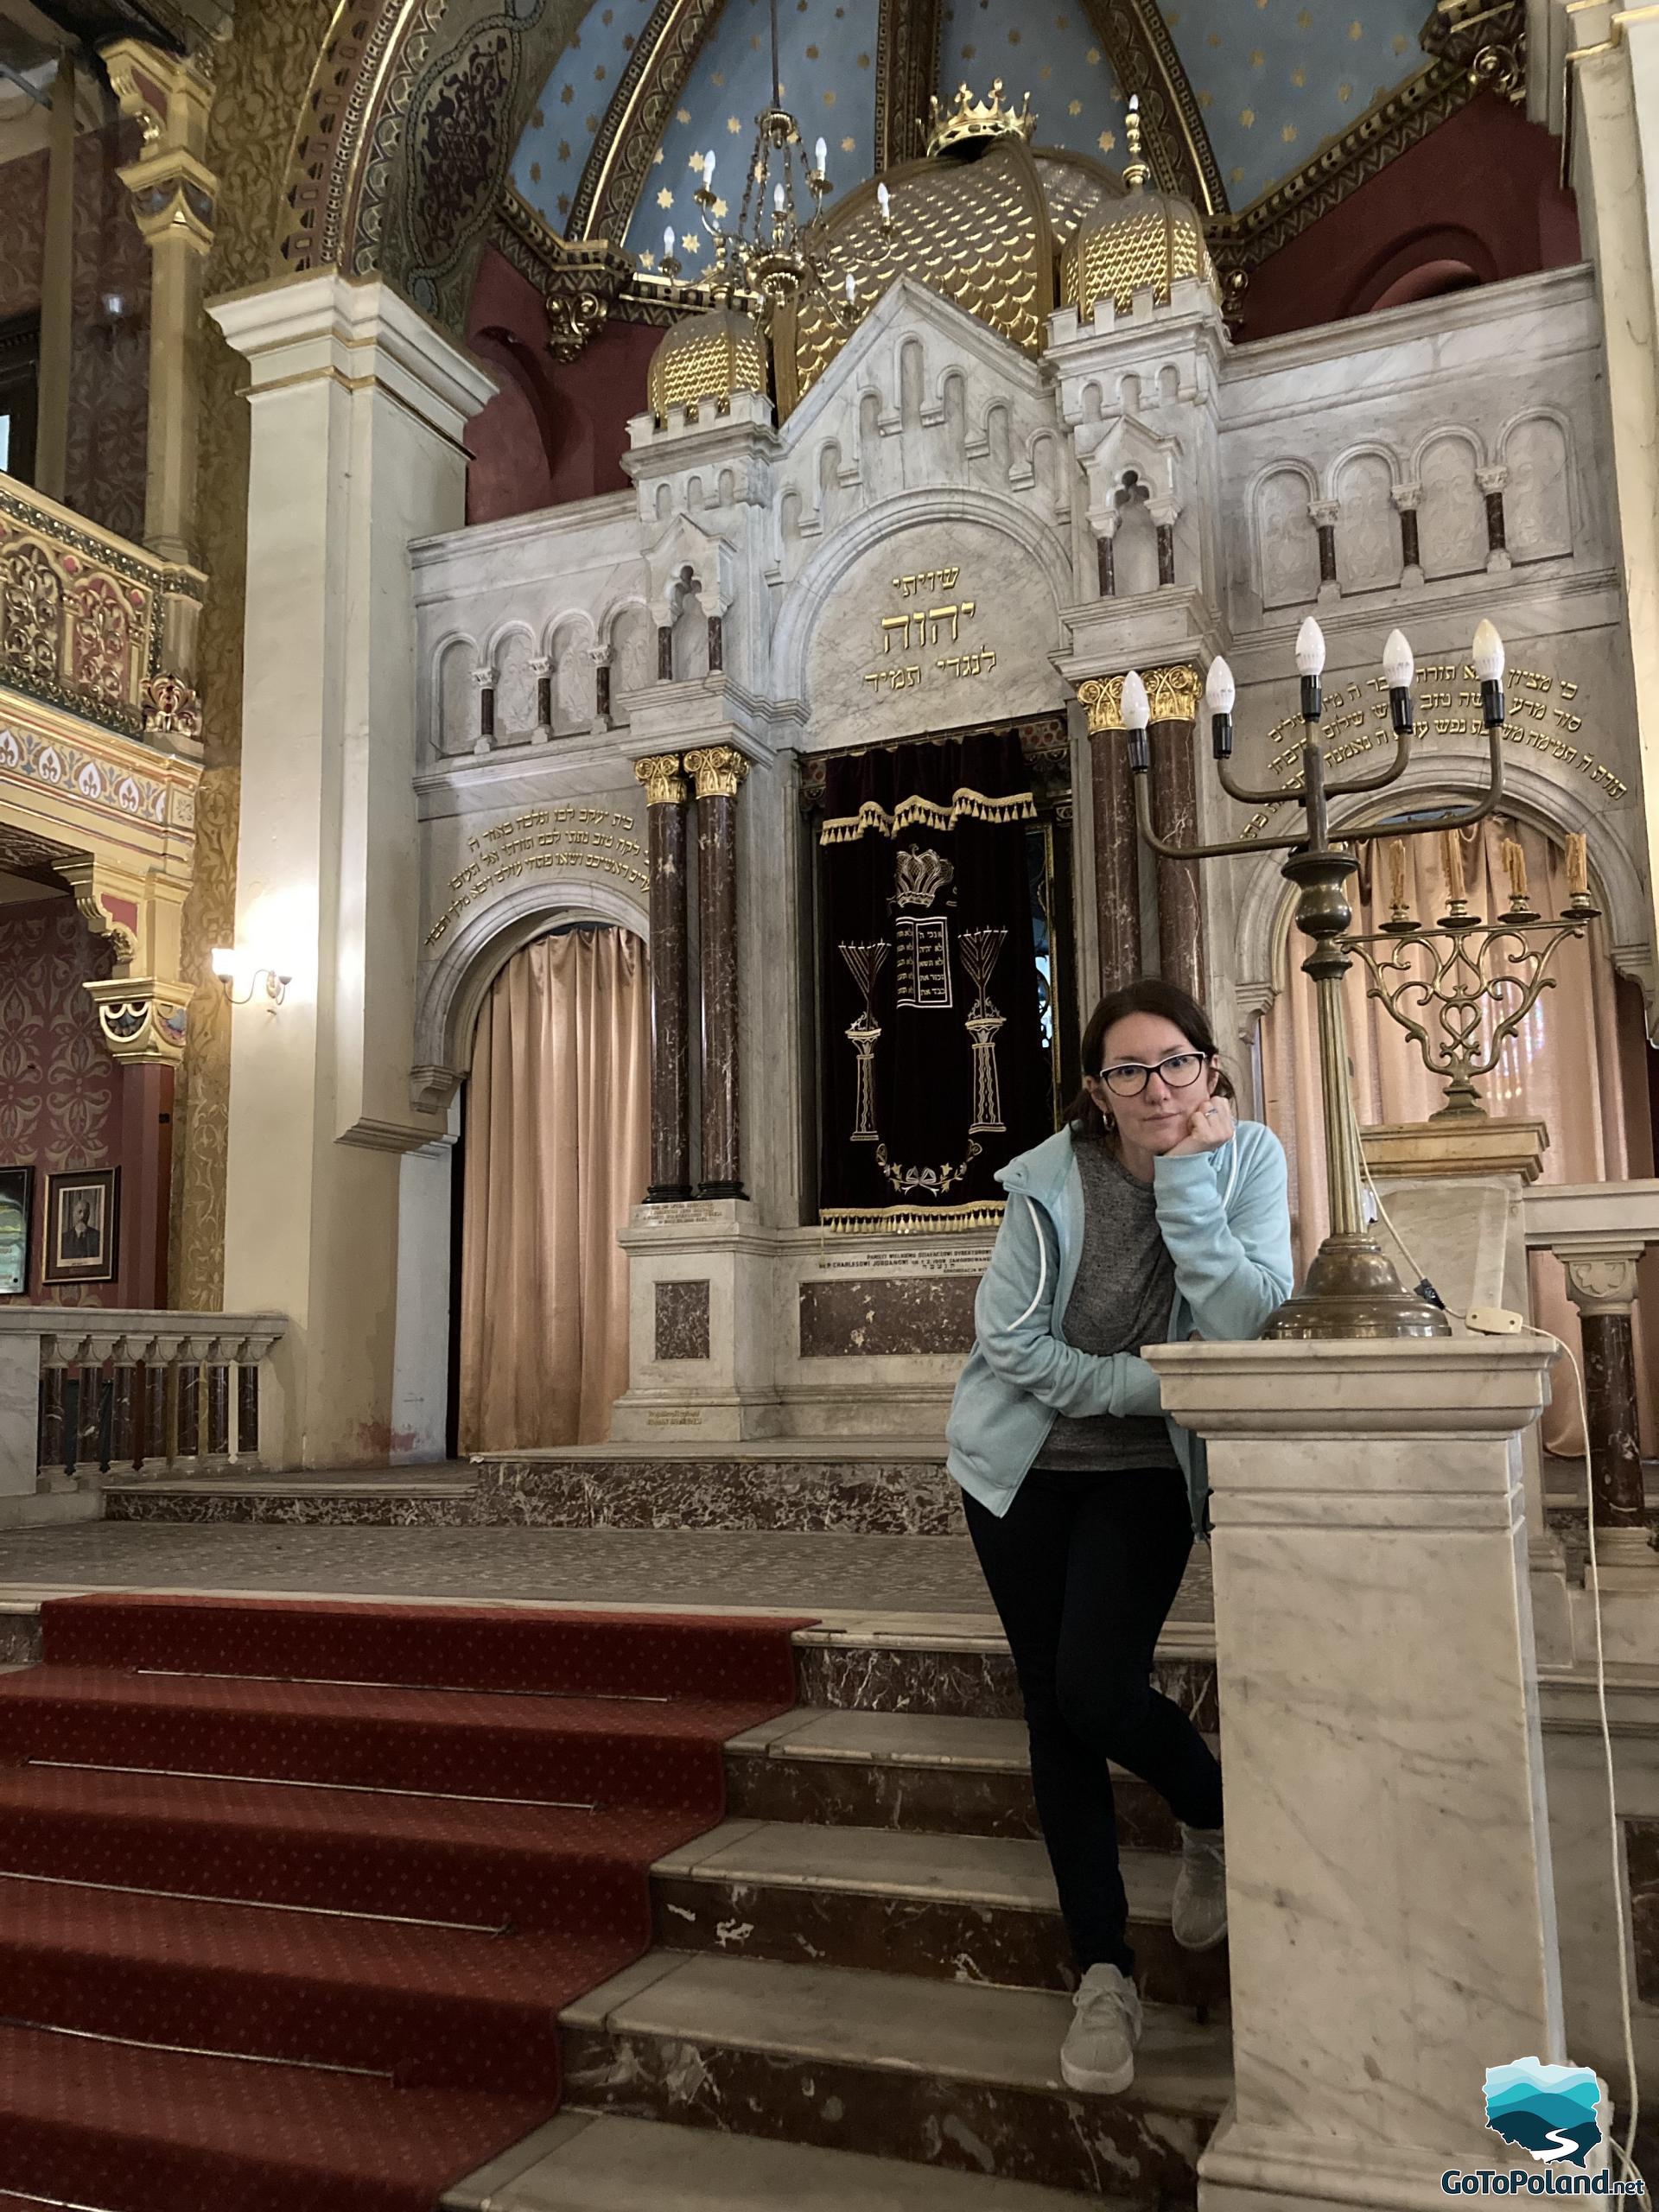 a woman is standing in a synagogue, behind her there is an altar cabinet used to store the Torah scrolls